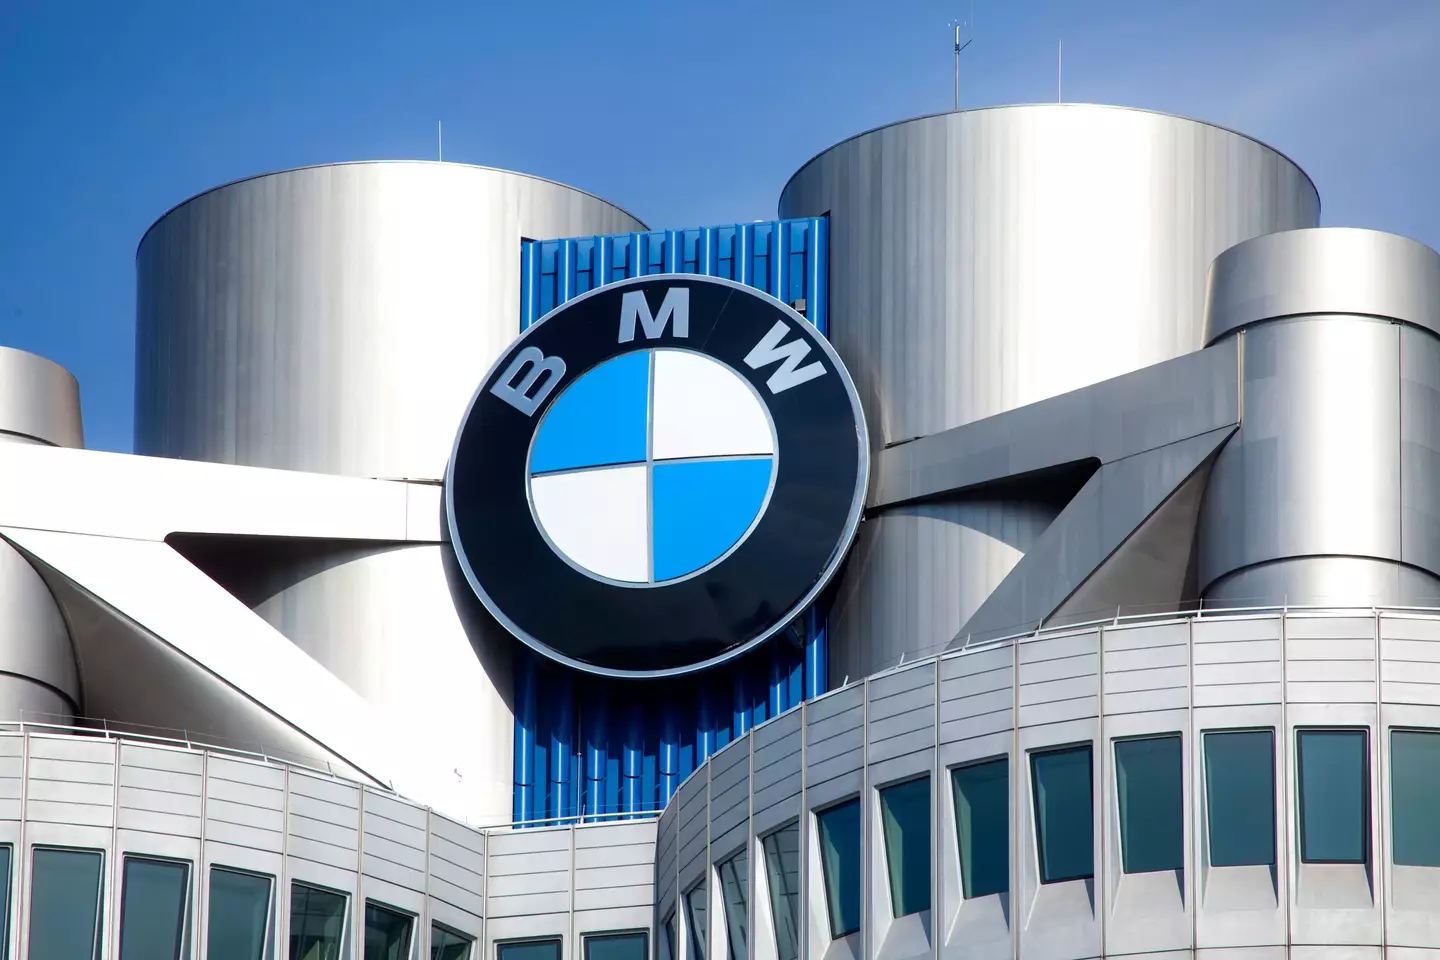 Back in July, BMW announced some customers would have to start paying a monthly fee to use the heated seats feature.